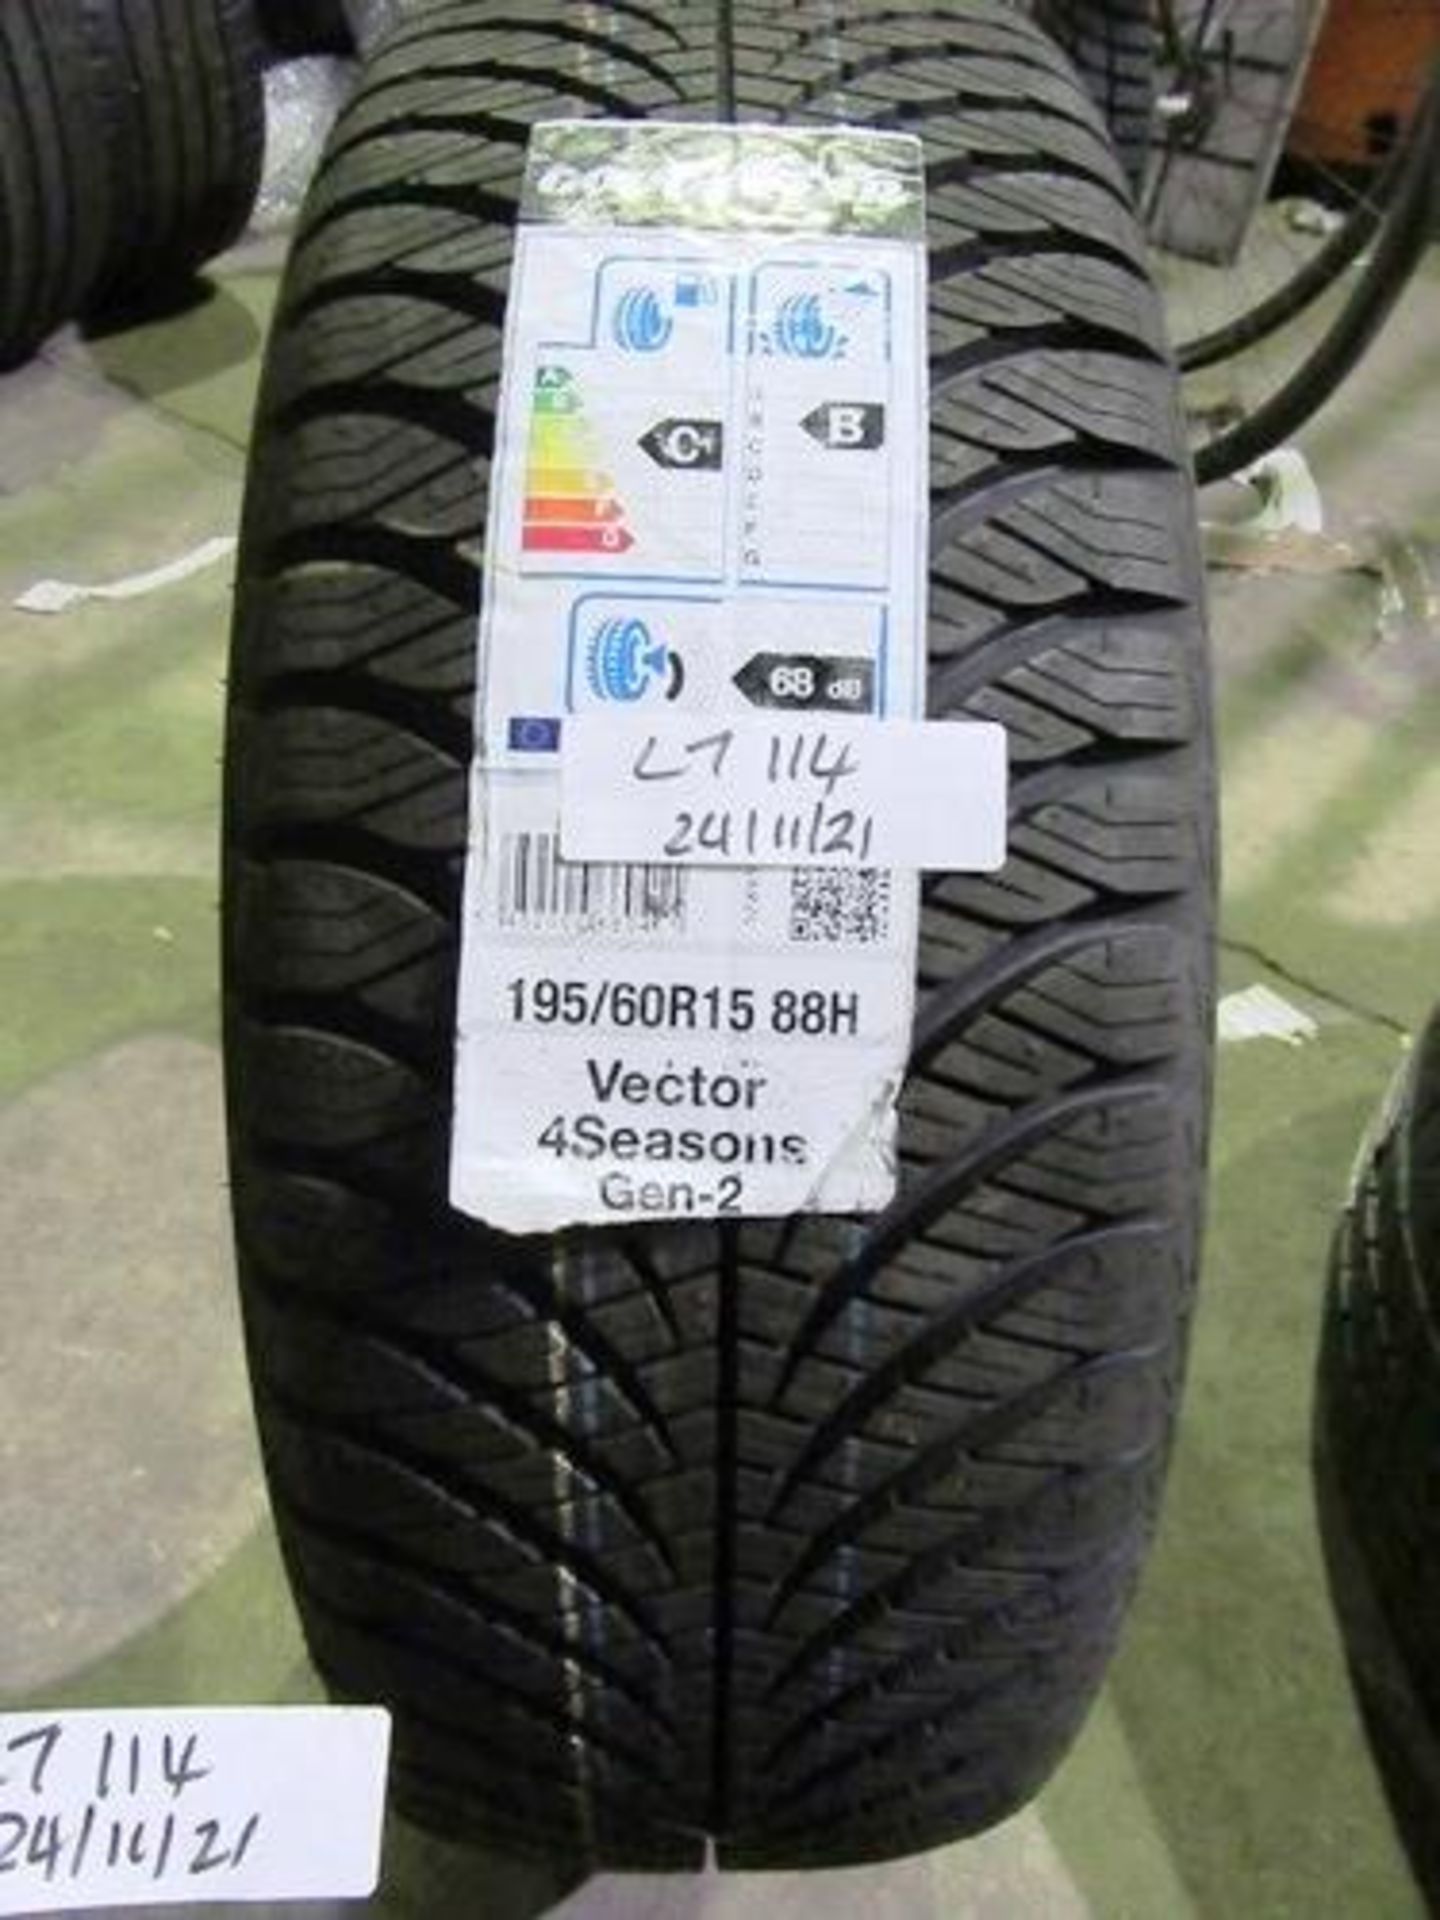 1 x Goodyear Vector 4 seasons Gen 2 tyre, size 195/60R15 88H, new with labels,Riken Road Performance - Image 2 of 2